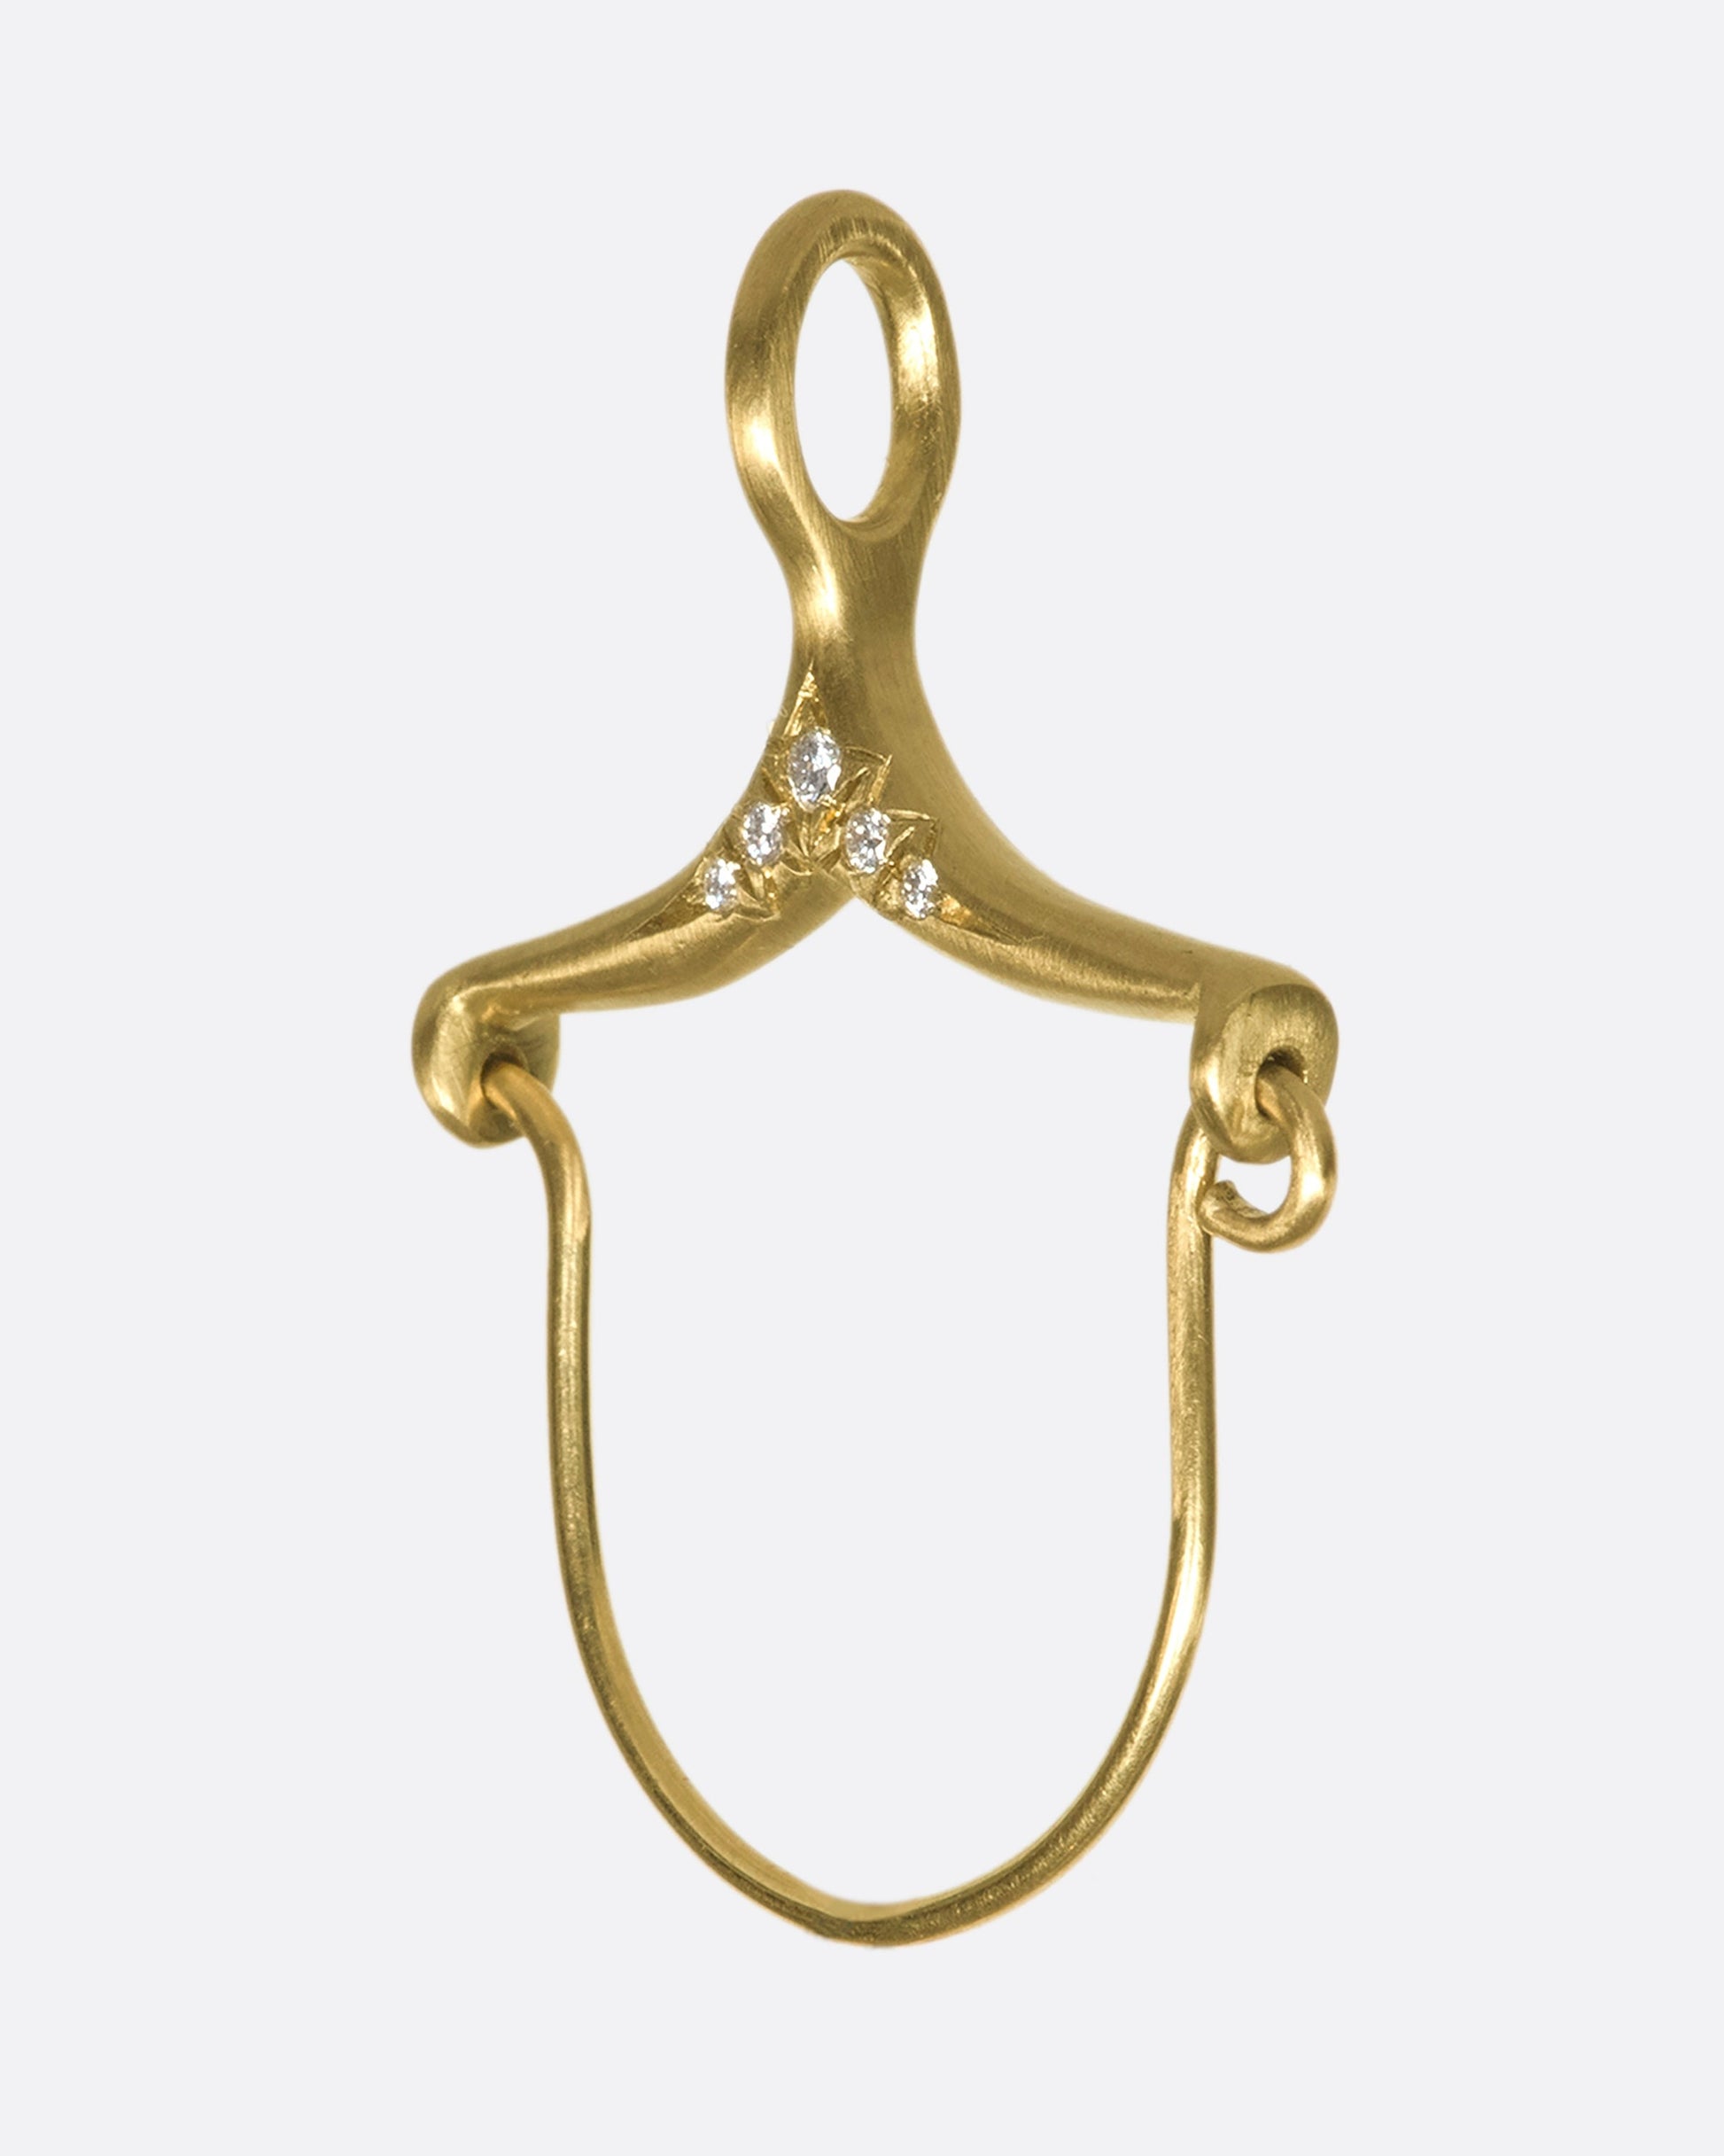 A gold and diamond charm holder from the side.